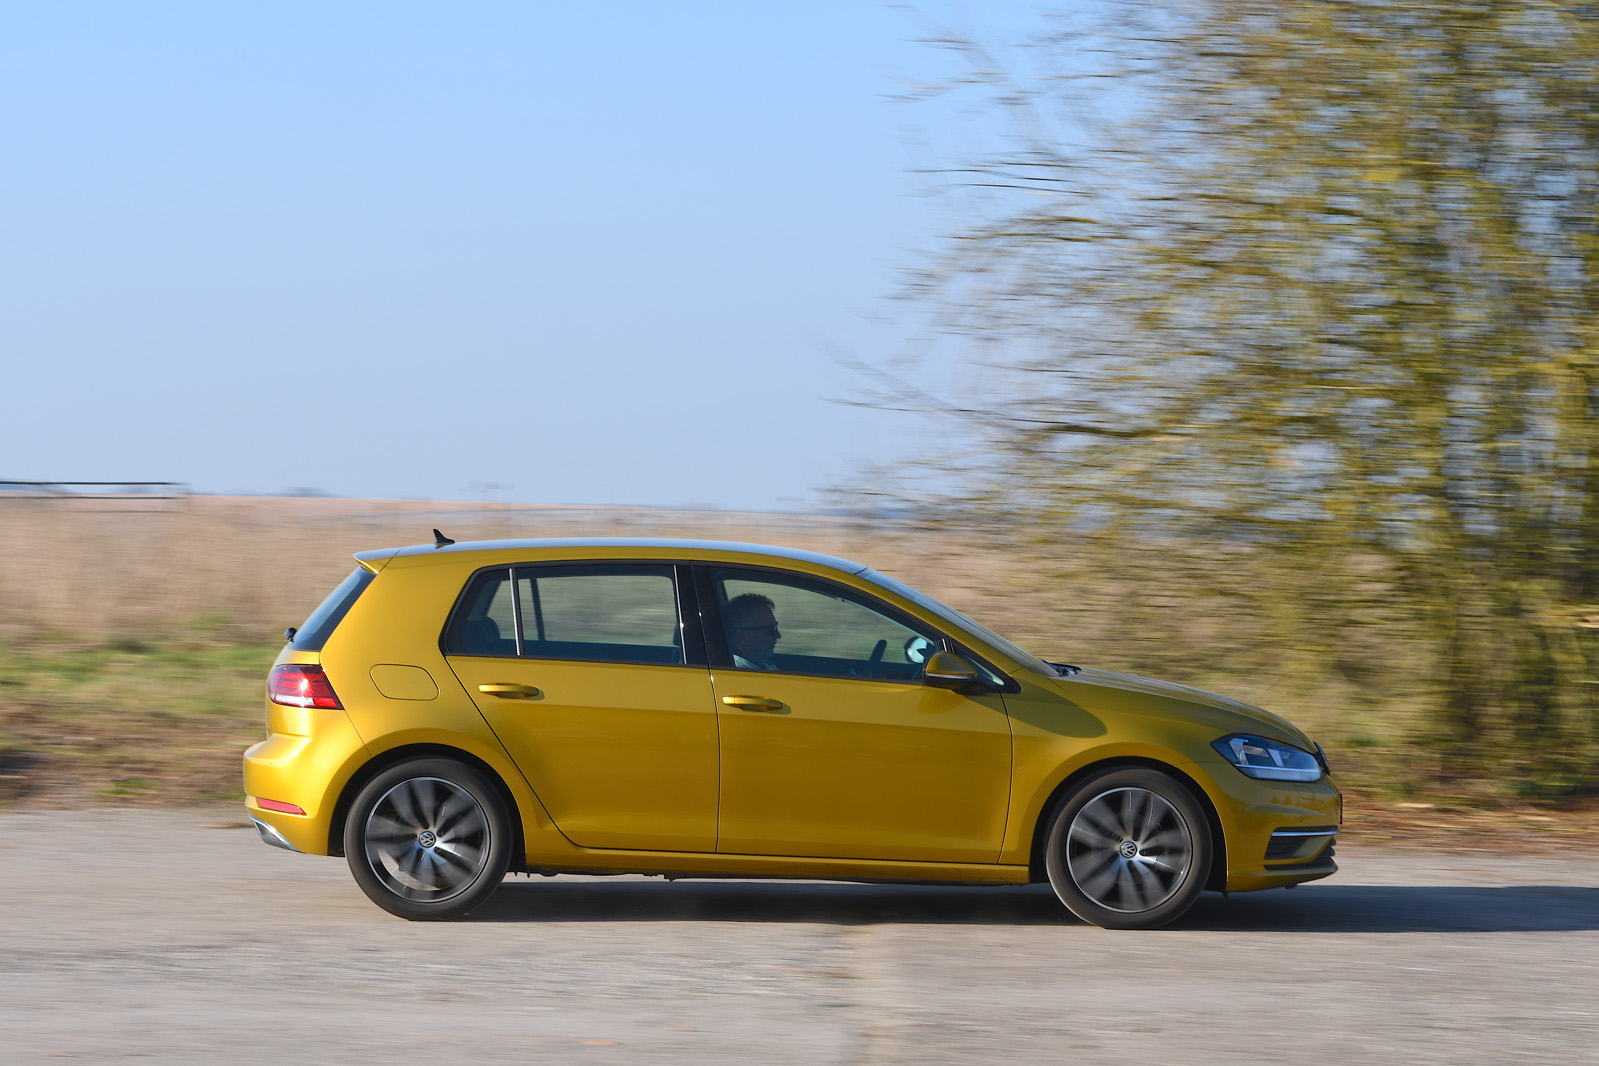 Nearly new buying guide: Volkswagen Golf Mk7